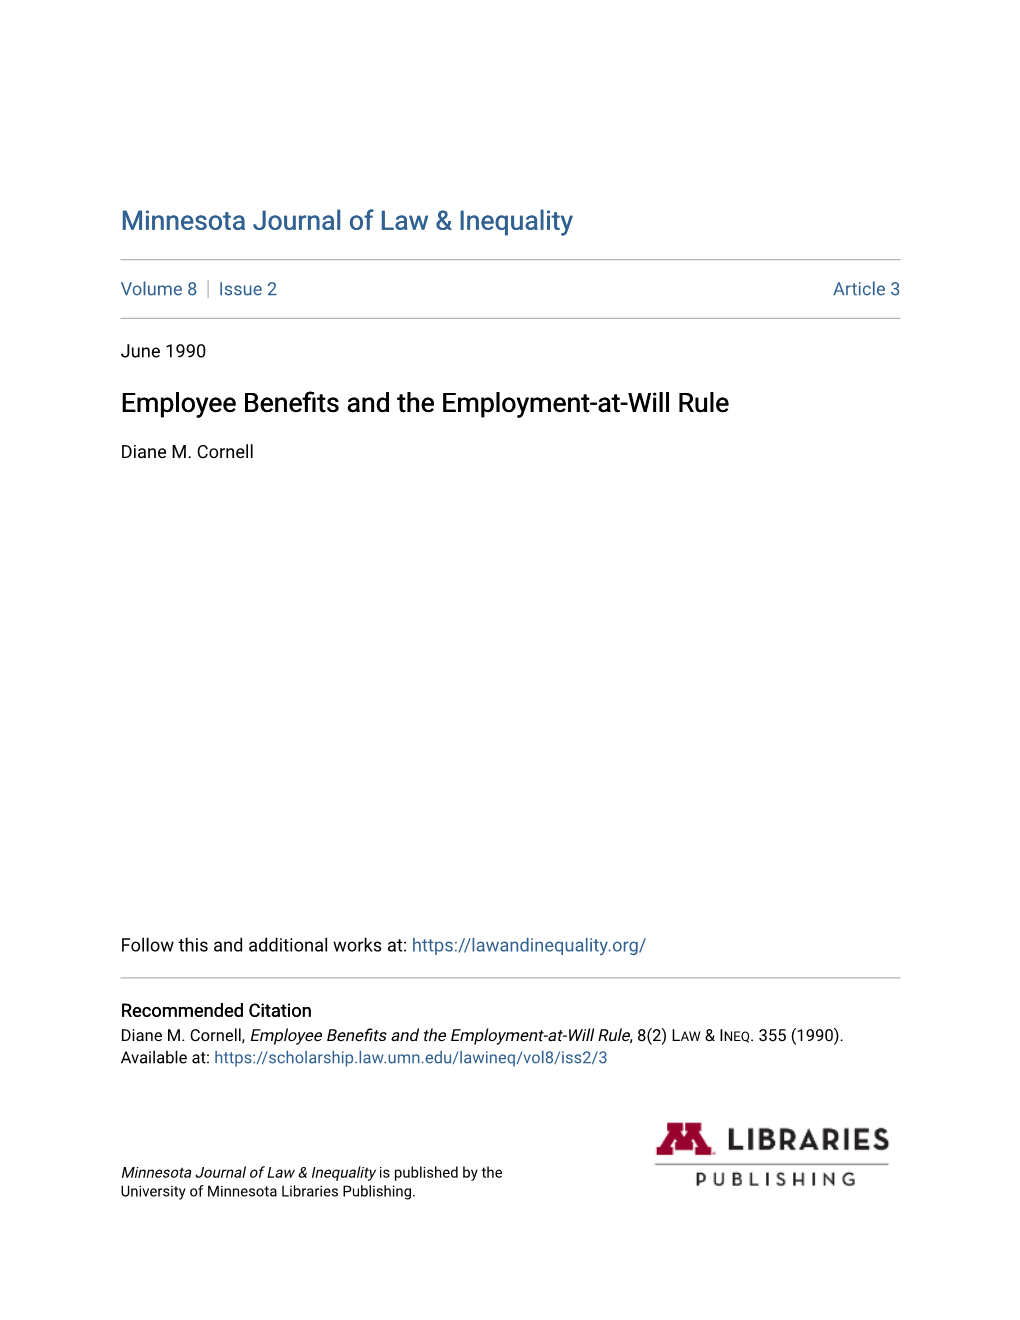 Employee Benefits and the Employment-At-Will Rule